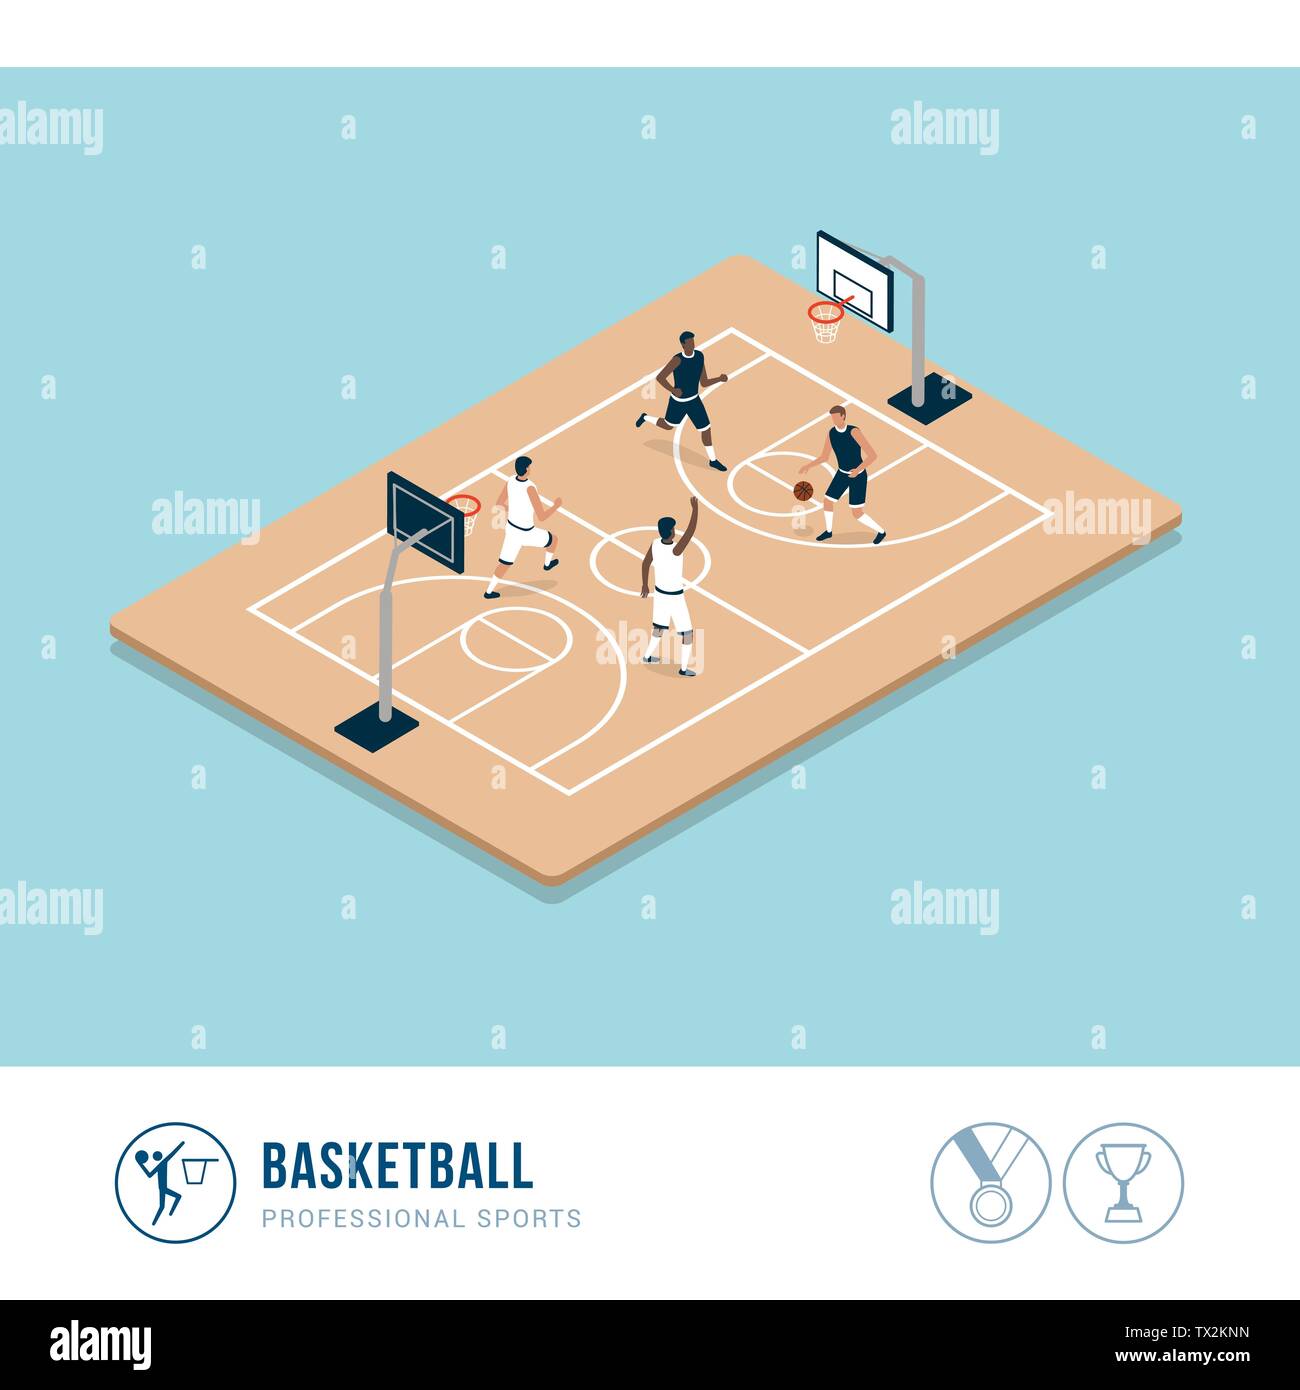 Professional sports competition: basketball match and players in the court Stock Vector